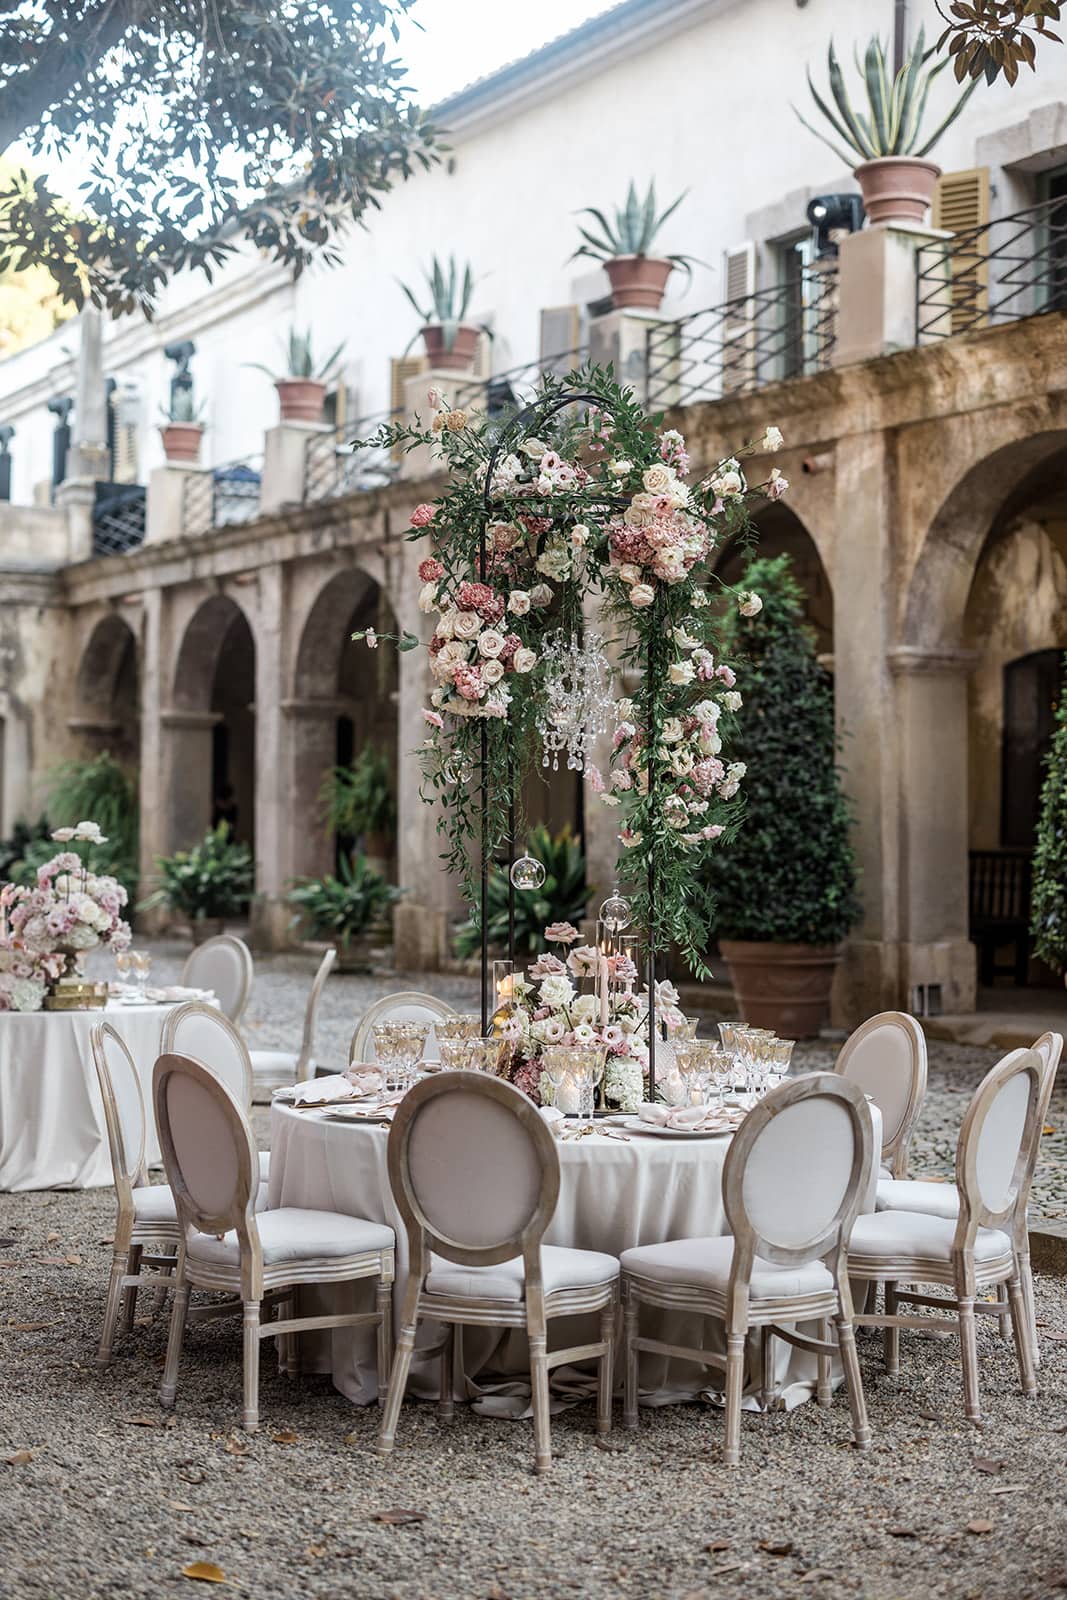 Floral arch stands on reception tables in Sardinia wedding reception